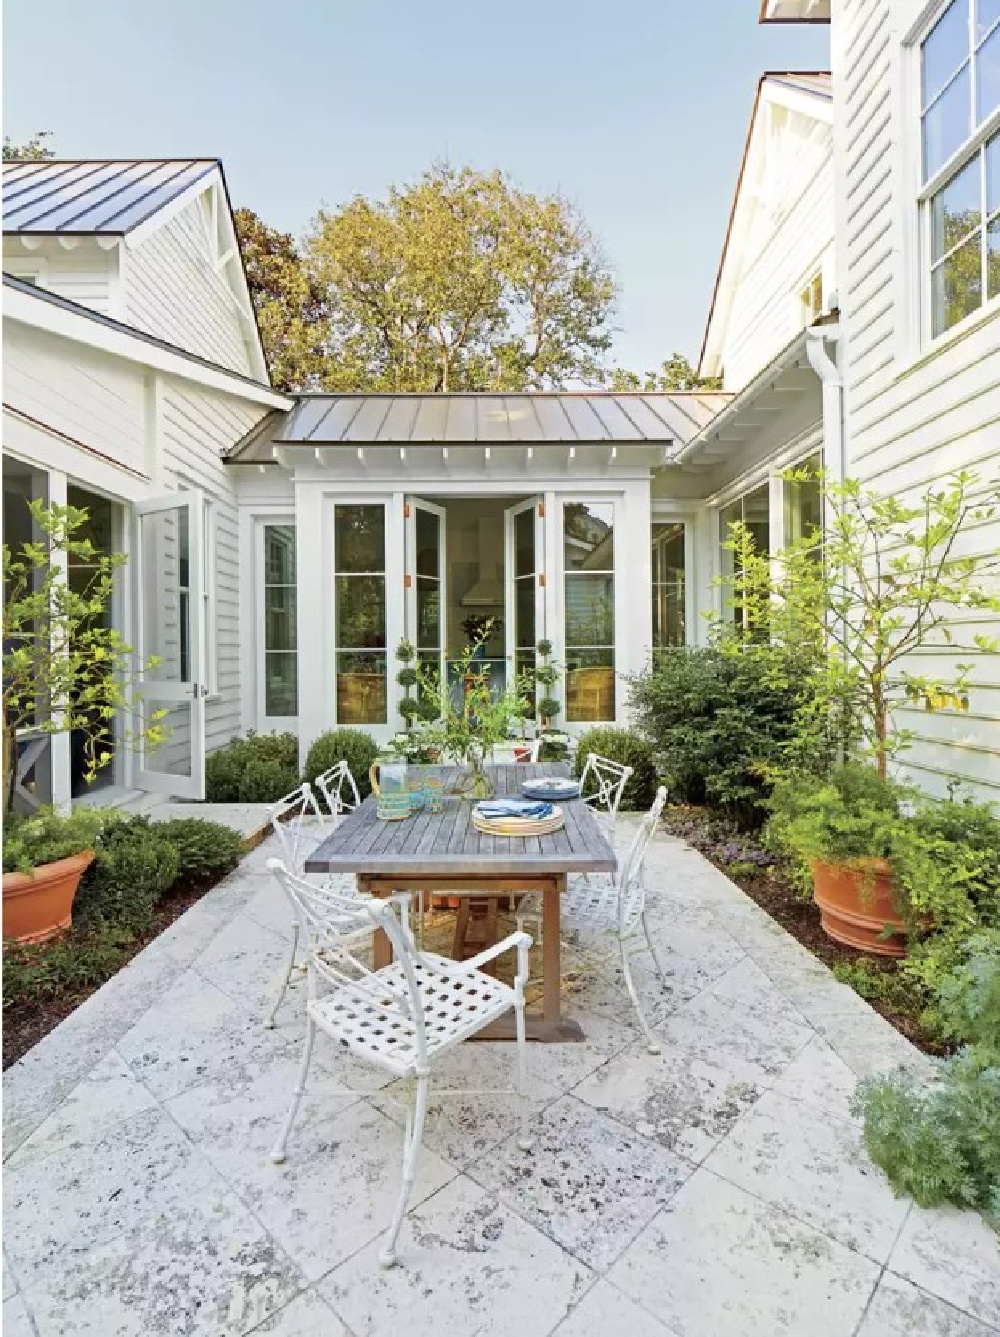 Charming courtyard at a Charleston home - Julia Berolzheimer's home in Southern Living (photo: Hector Manuel Sanchez). #bmsimplywhite